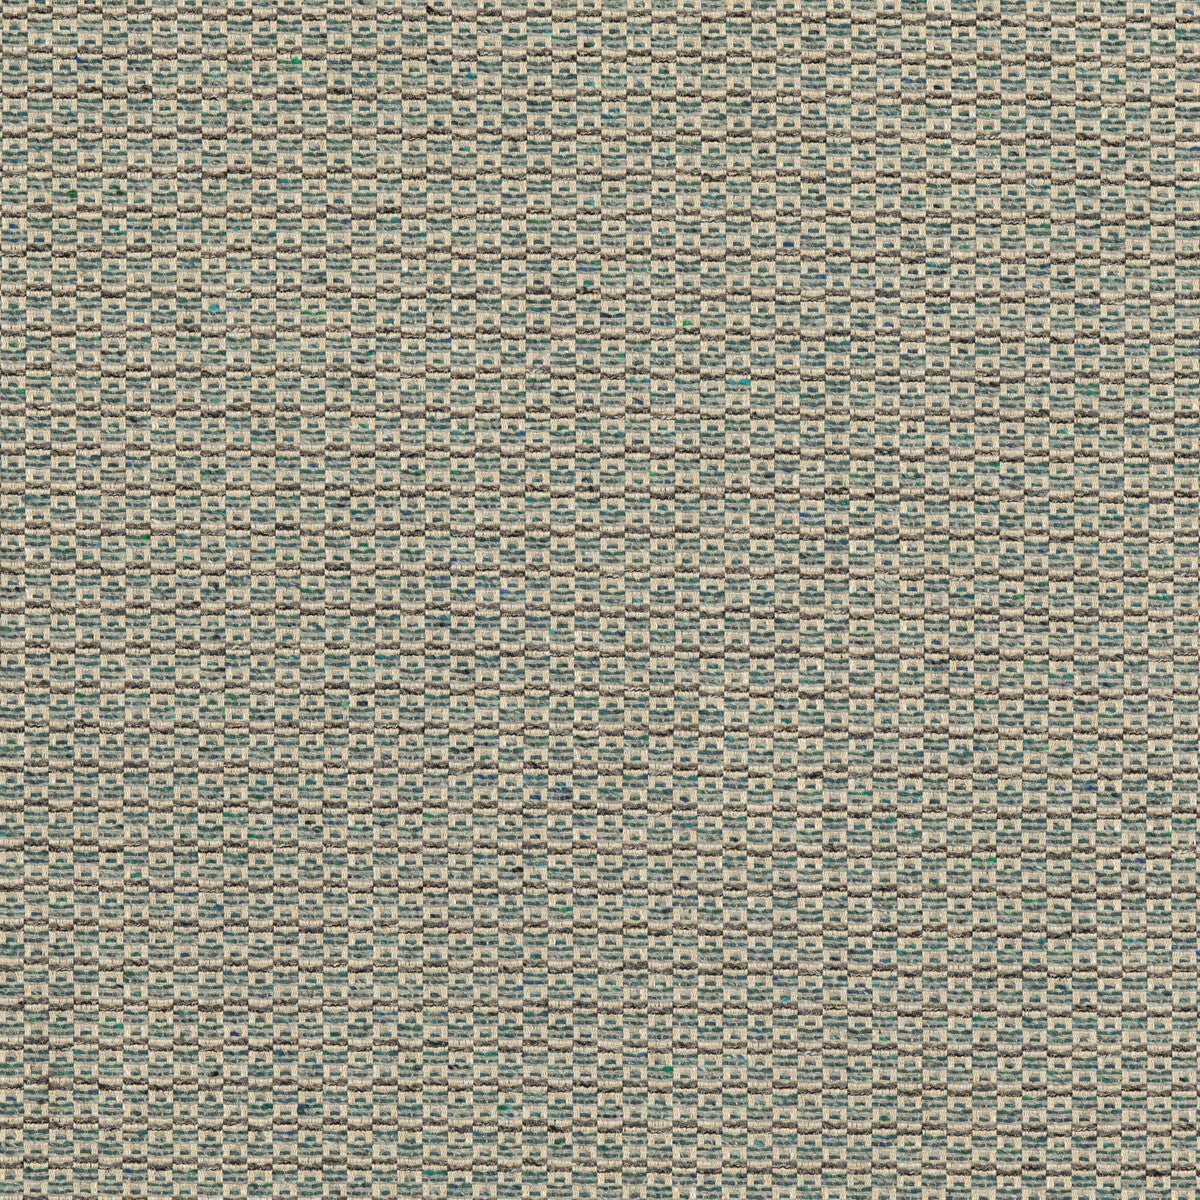 Penswood fabric in teal color - pattern BF10880.615.0 - by G P &amp; J Baker in the Essential Colours II collection